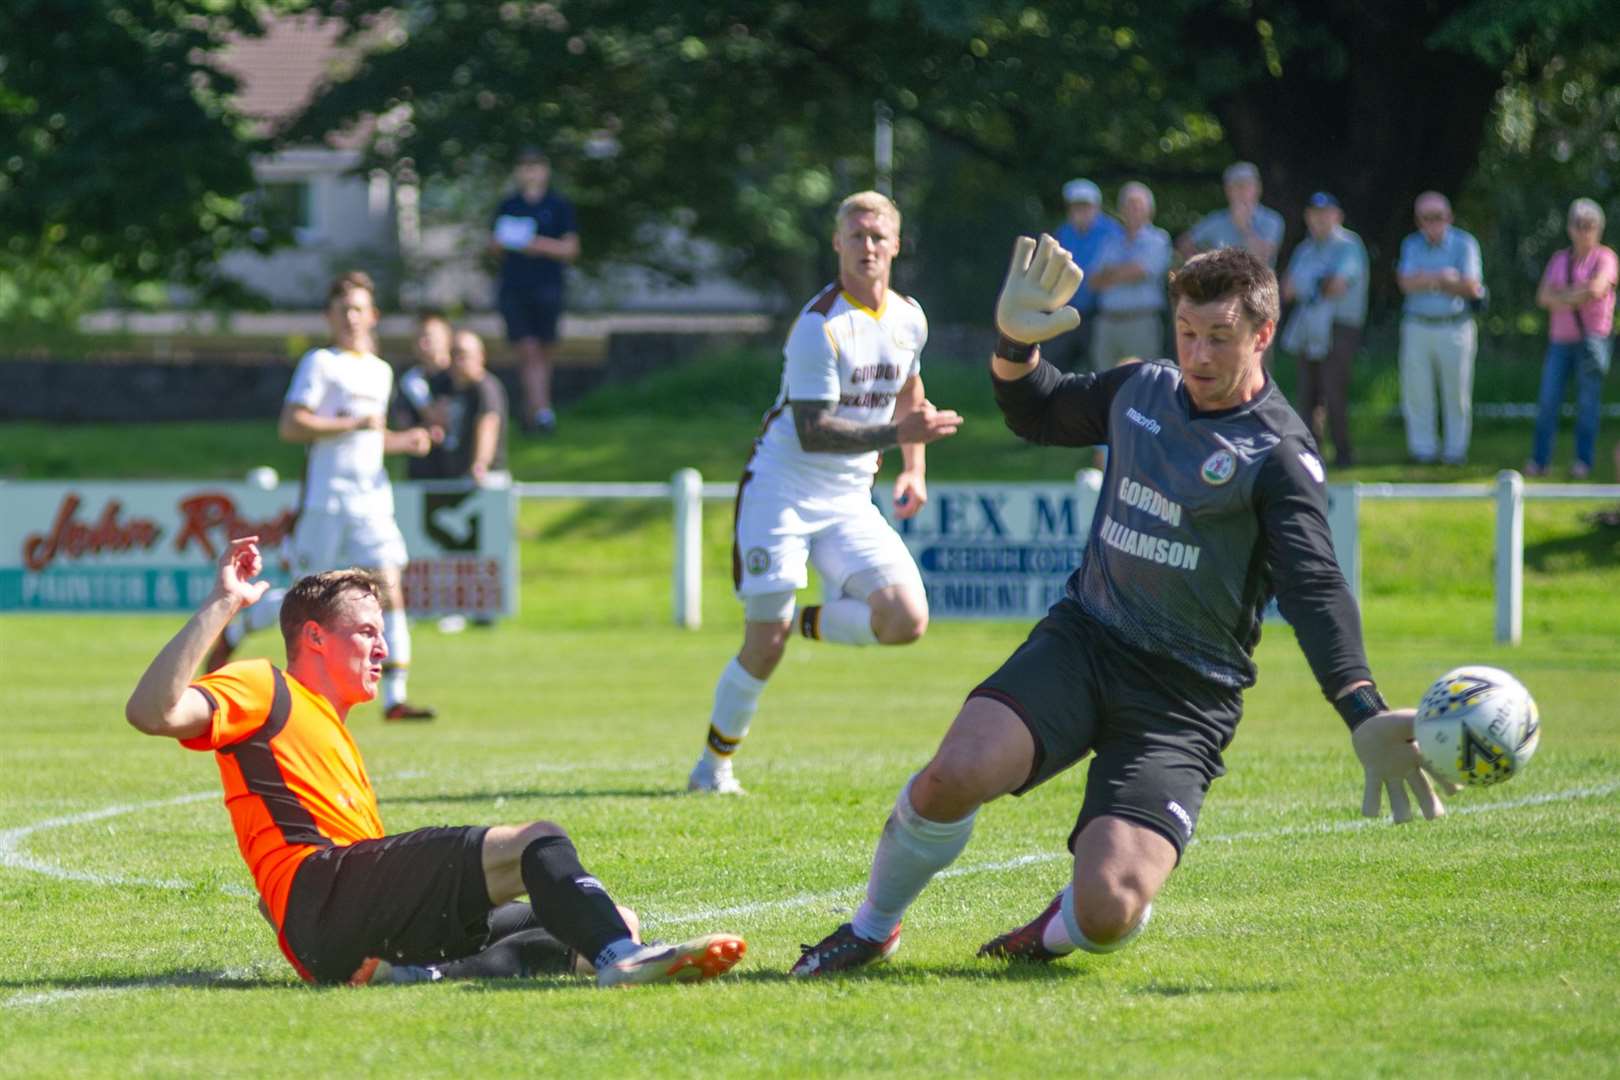 Rothes forward Steven Anderson forces a good save from Forres Mechanics' keeper Stuart Knight early in the match...Rothes FC (4) vs Forres Mechanics (1) - Mackessack Park, Rothes - Highland Football League 03/08/2019...Picture: Daniel Forsyth. Image No.044565.